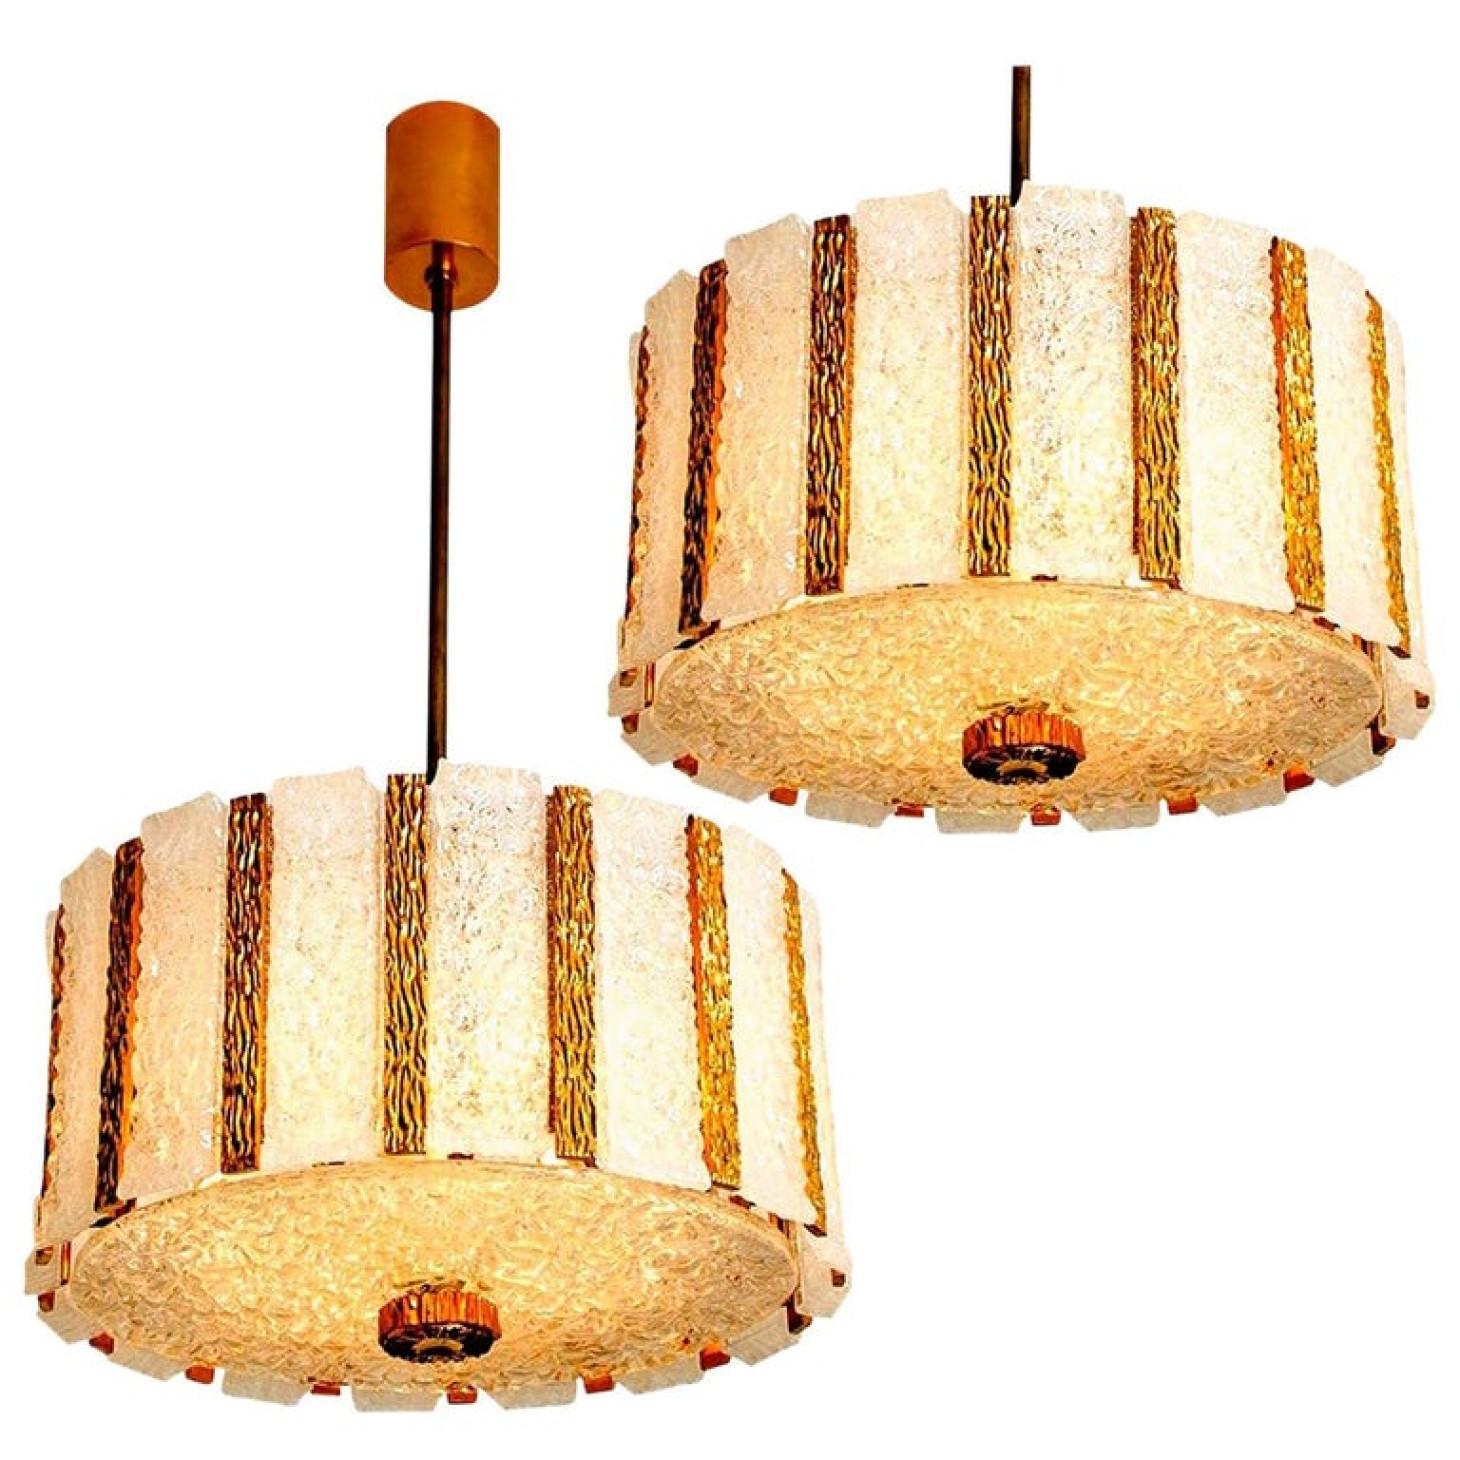 Pair of gold-plated bronze drum light fixtures with several glass panels. This pair is executed to a very high standard. A part is rare to find.

The stylish elegance of this set suits many environment, from midcentury to Hollywood Regency, from